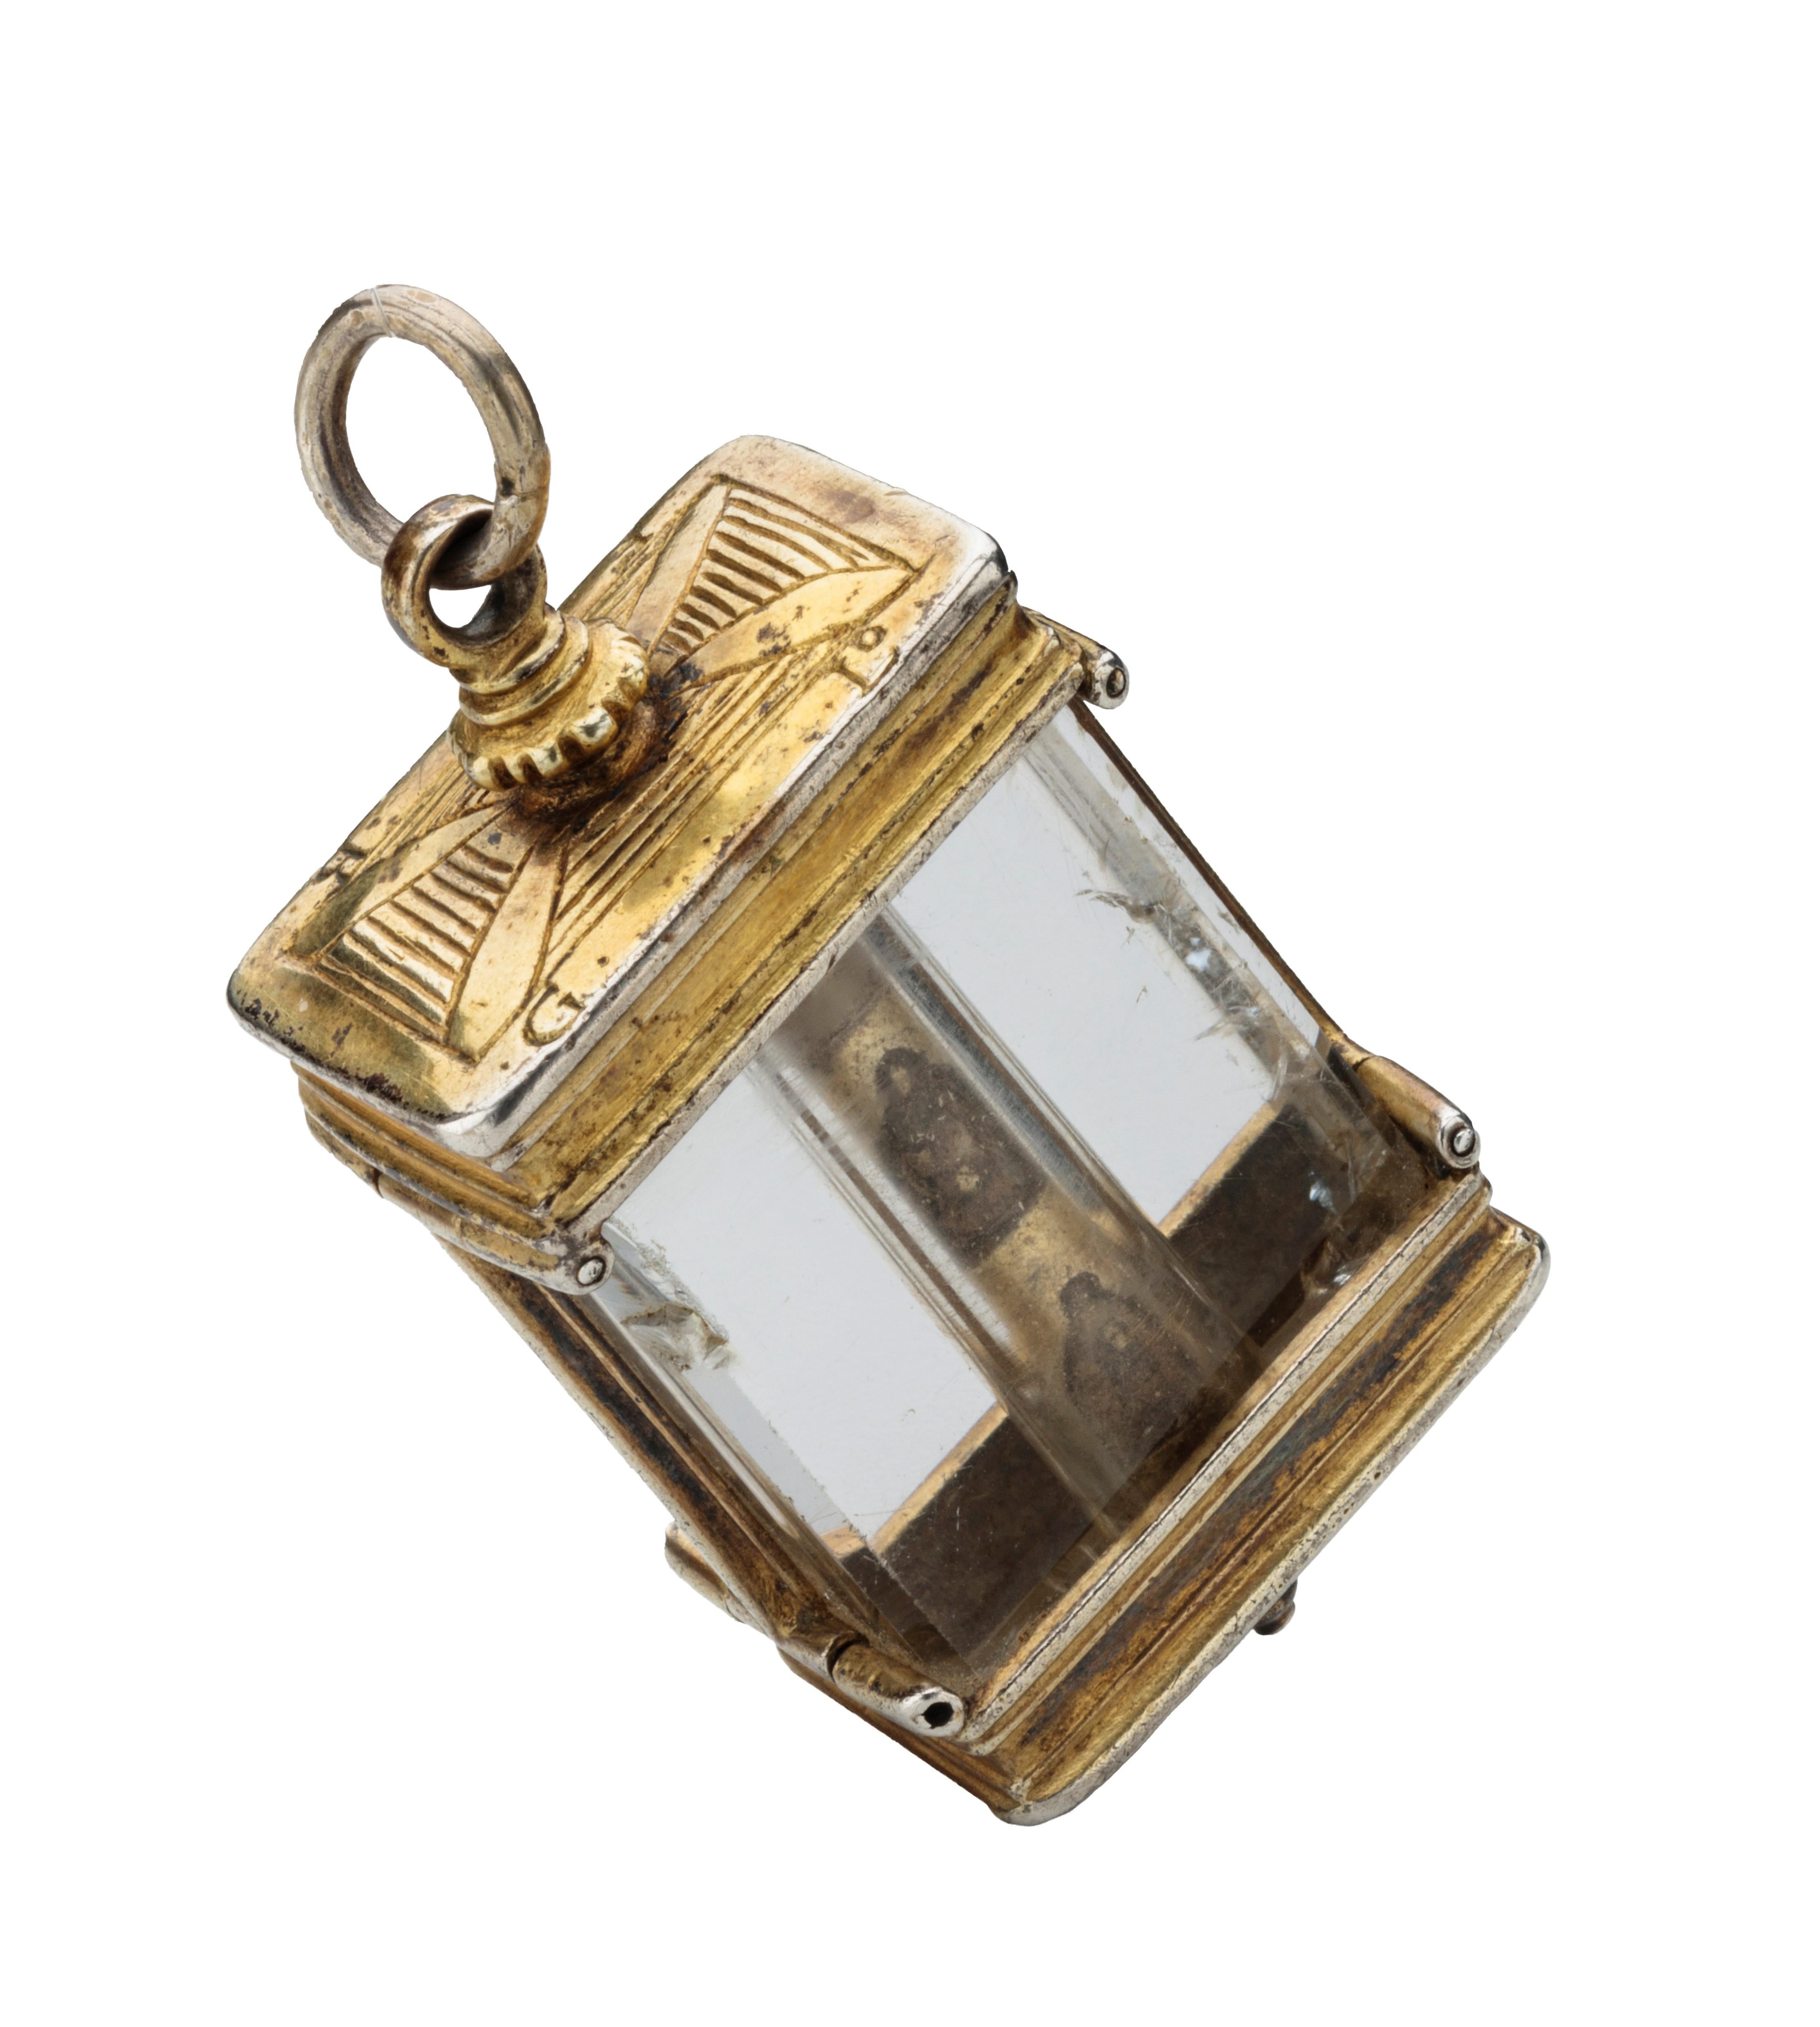 ROCK CRYSTAL PENDANT WITH COLUMN
France or Italy, 16th century 
Fire-gilded silver, rock crystal, verre églomisé  
Weight 96 grams; dimensions 75 × 35 × 21 mm (with loop)  

Architectural pendant with rectangular cross section, rock crystal casing,